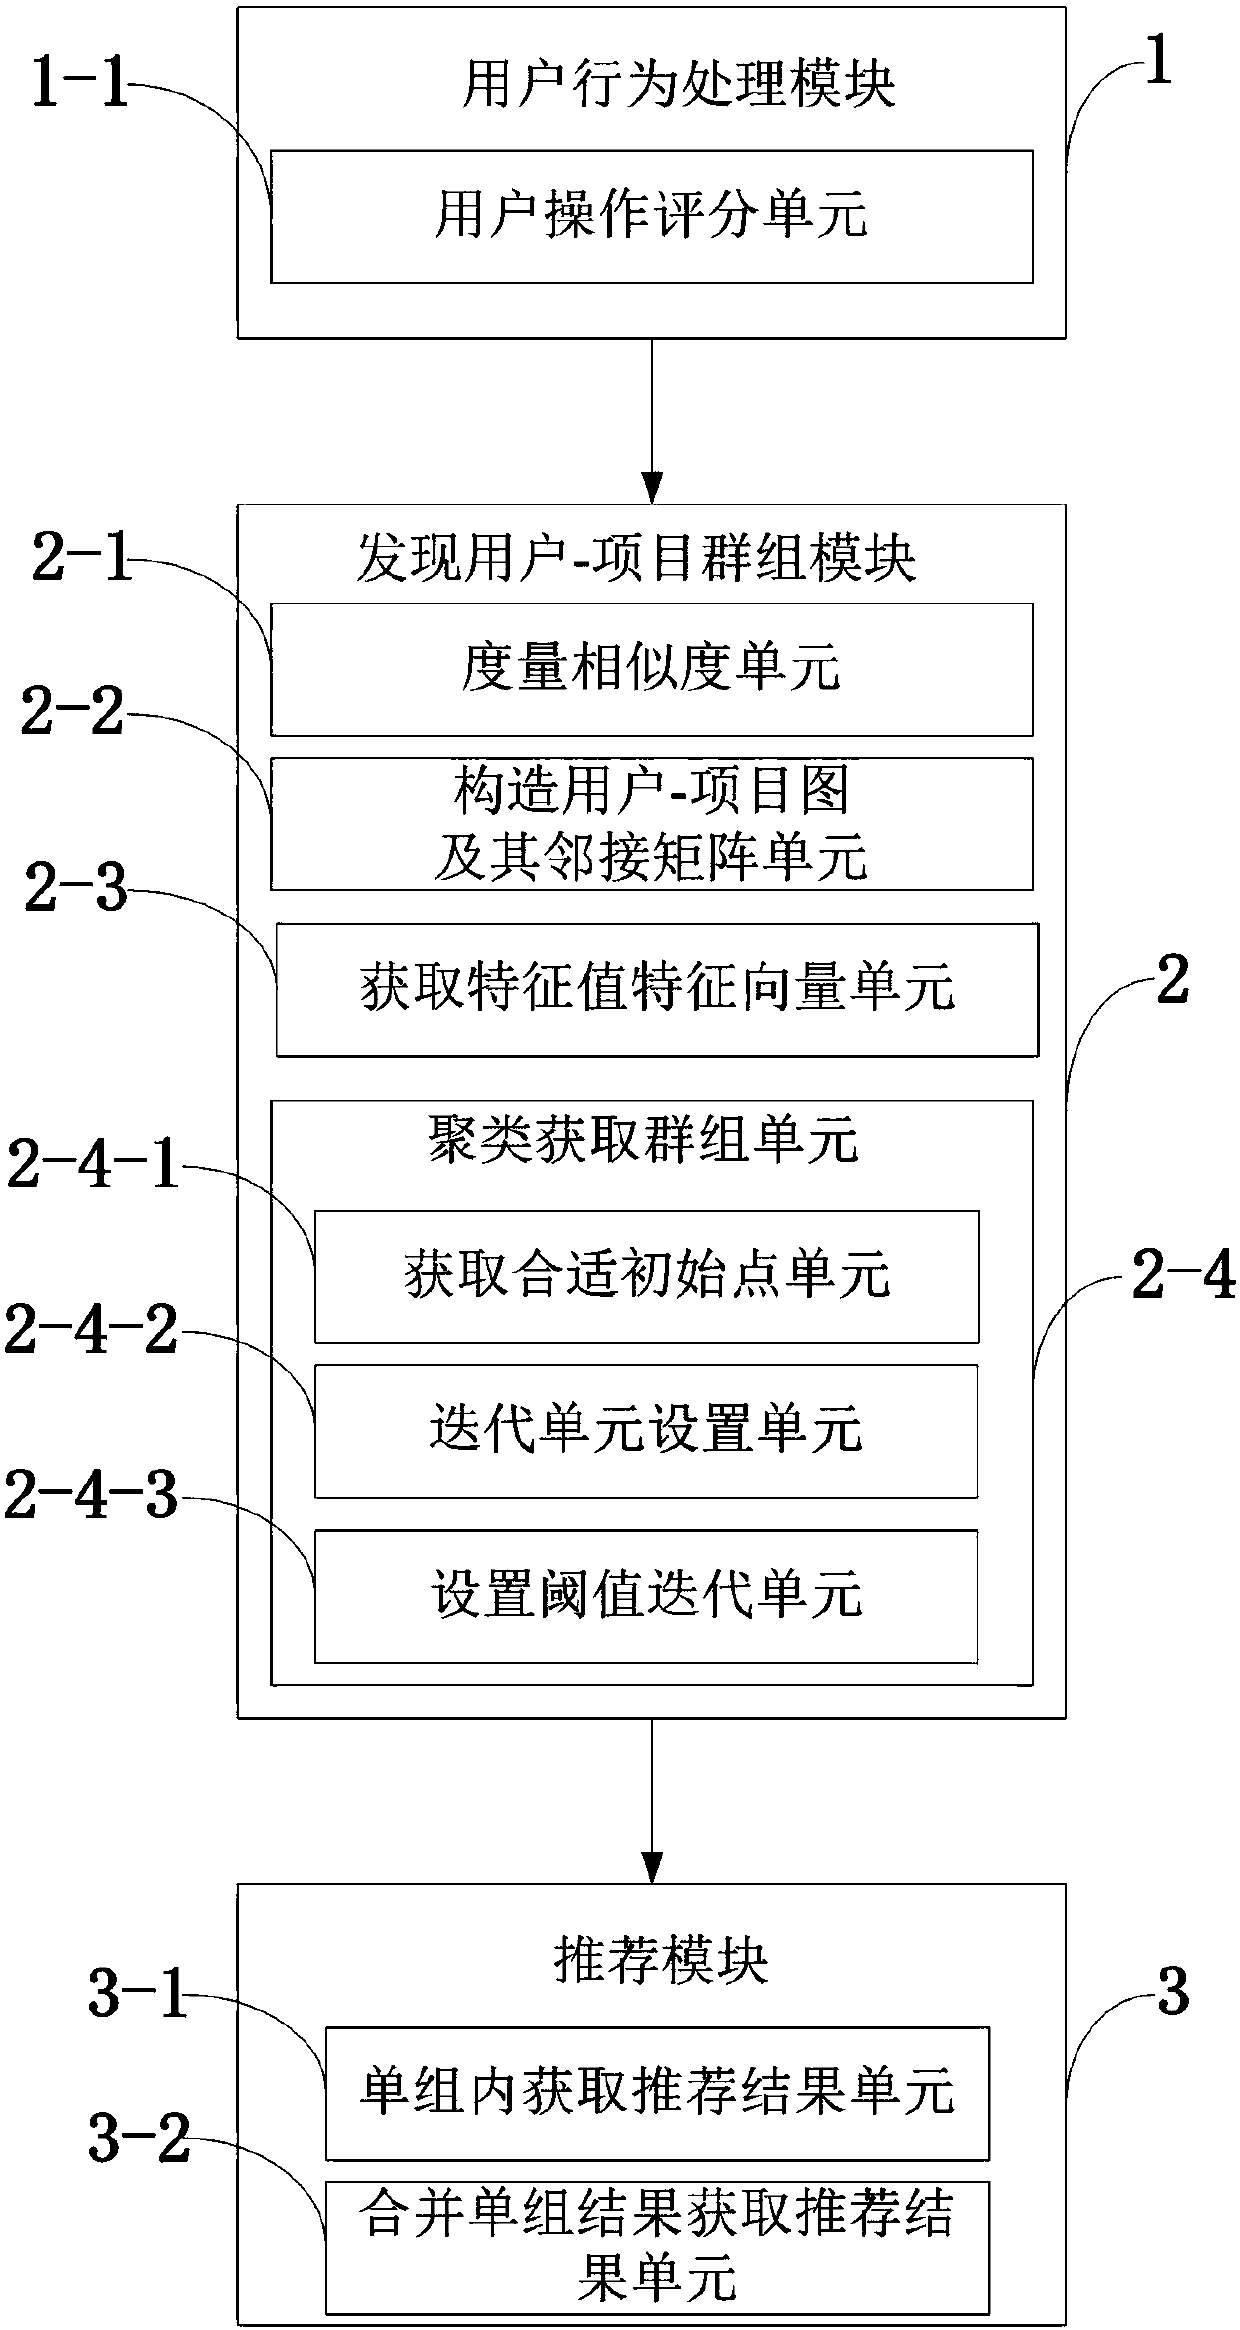 Cluster group discovery-based recommendation system and method and personalized recommendation system